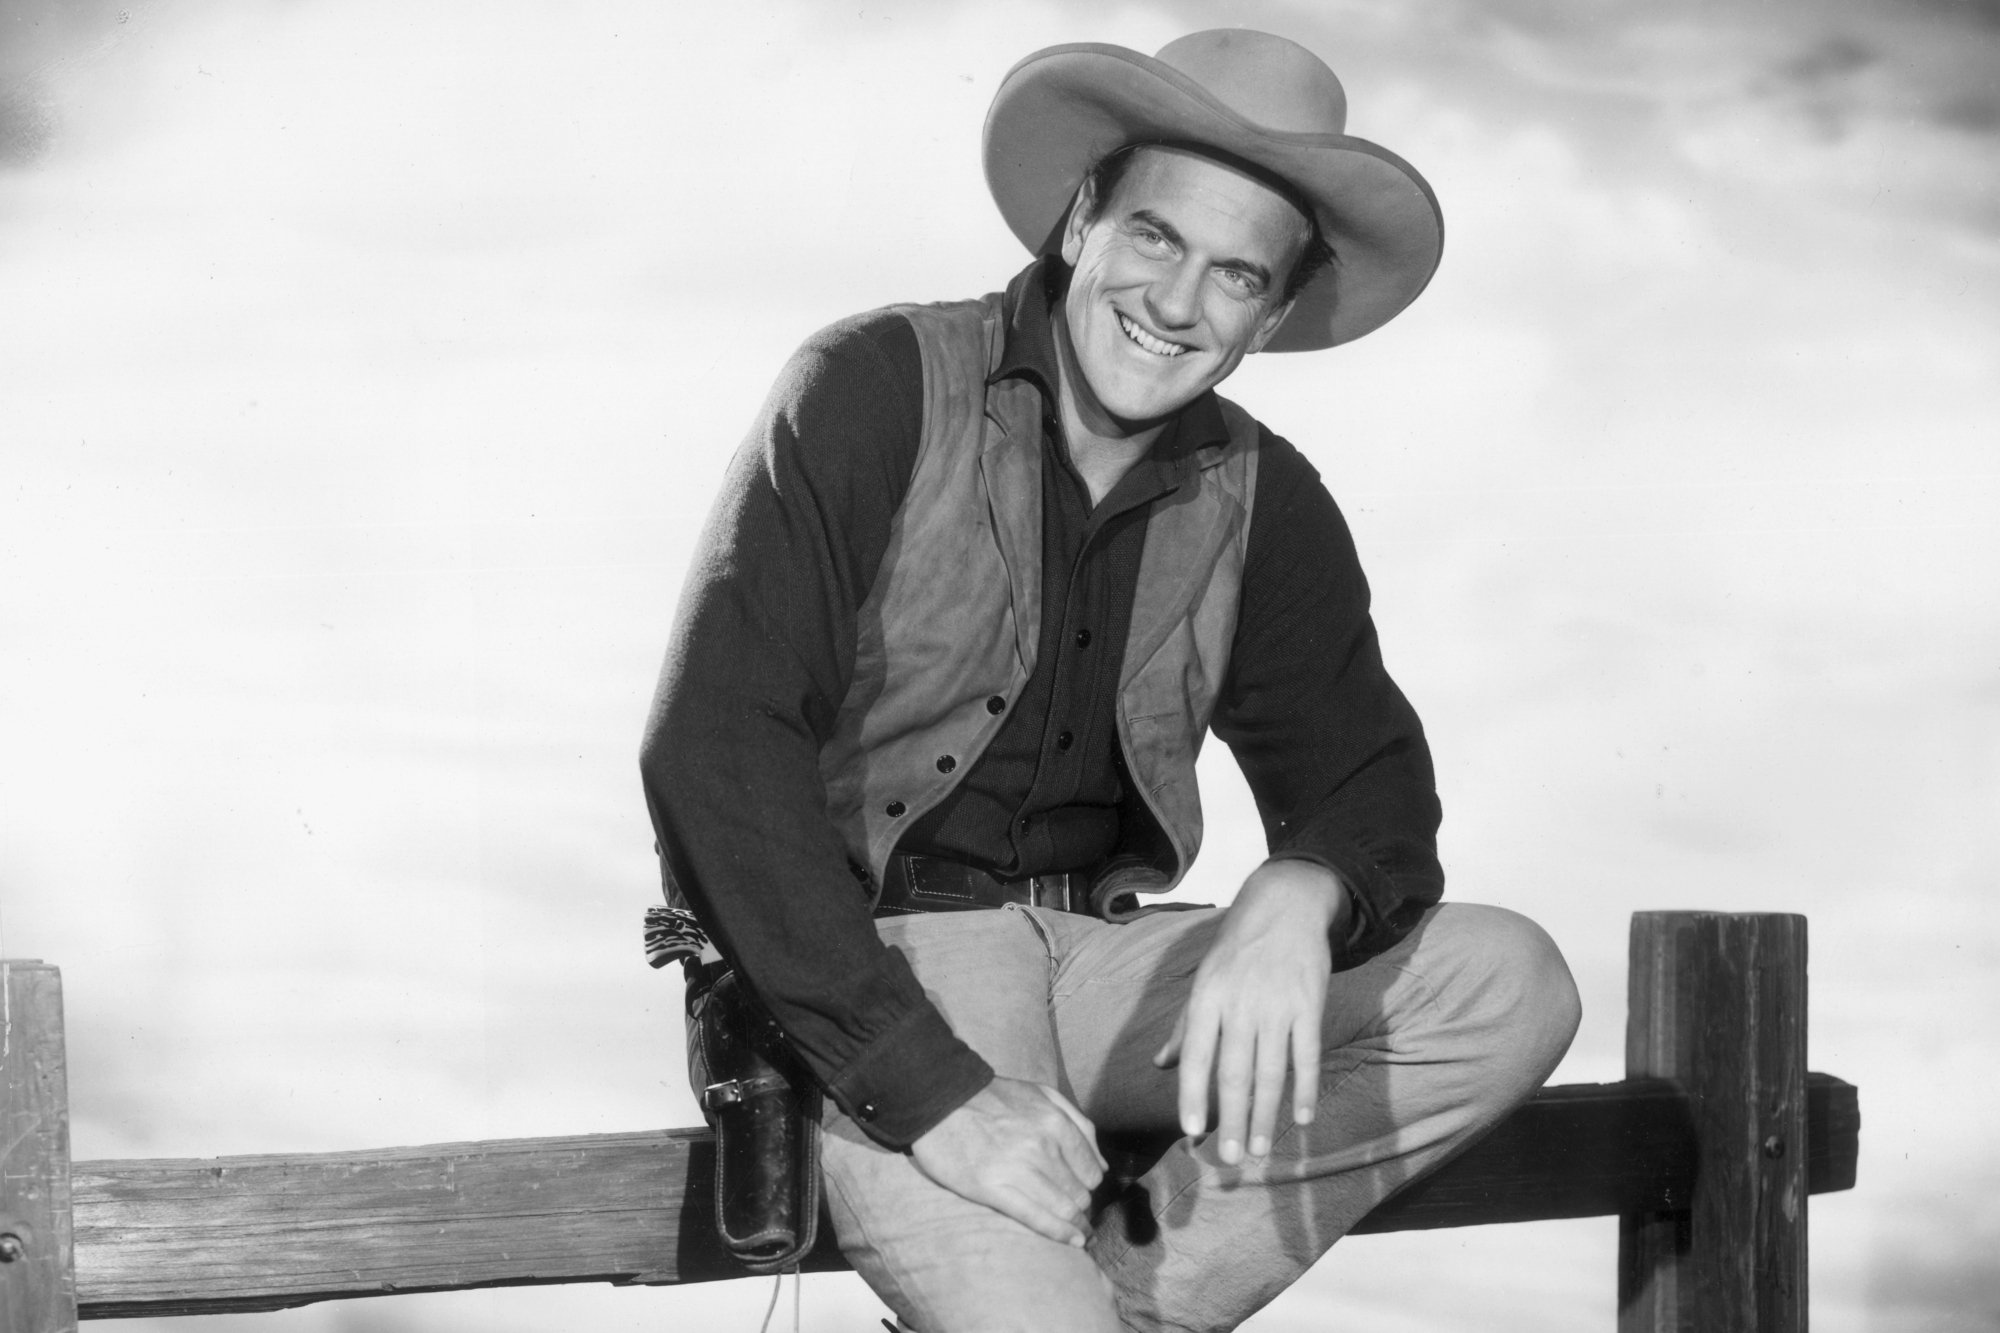 'Gunsmoke' James Arness as U.S. Marshal Matt Dillon in a black-and-white picture wearing his marshal uniform and sitting on a fence.